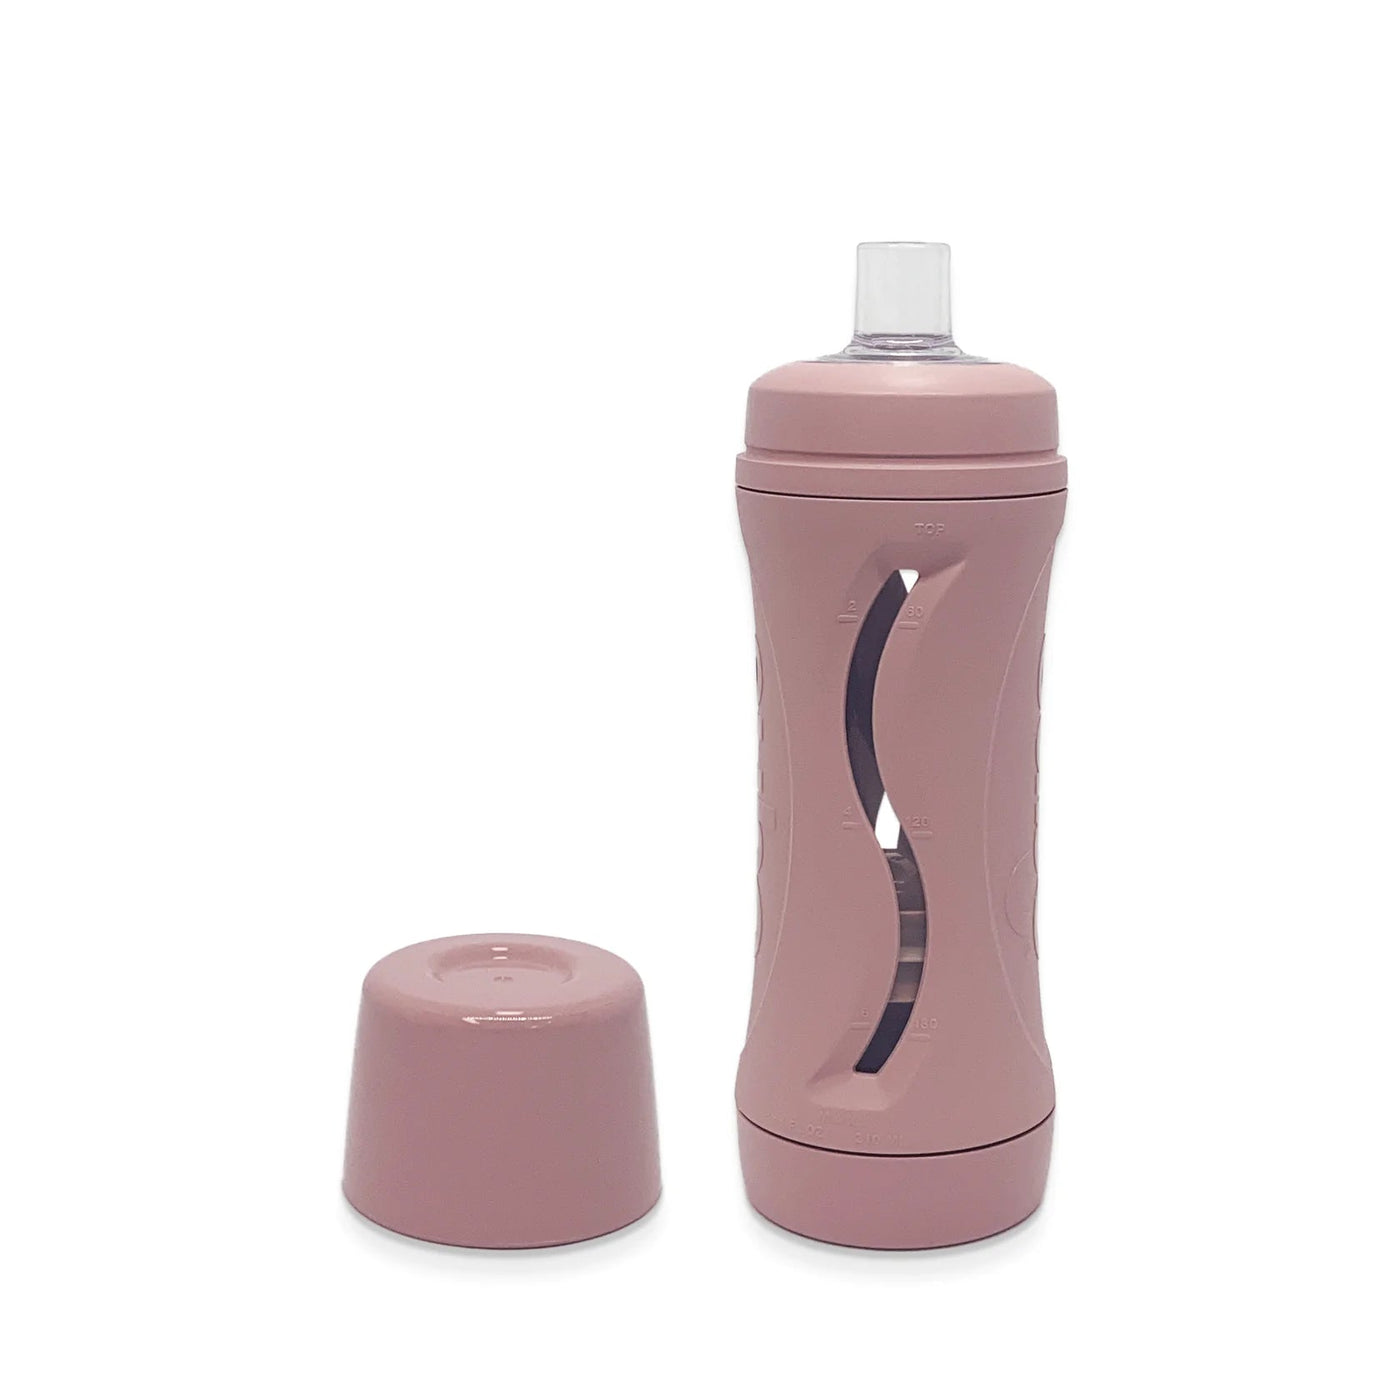 Subo The Food Bottle - Blush Limited Edition Mealtime Subo 